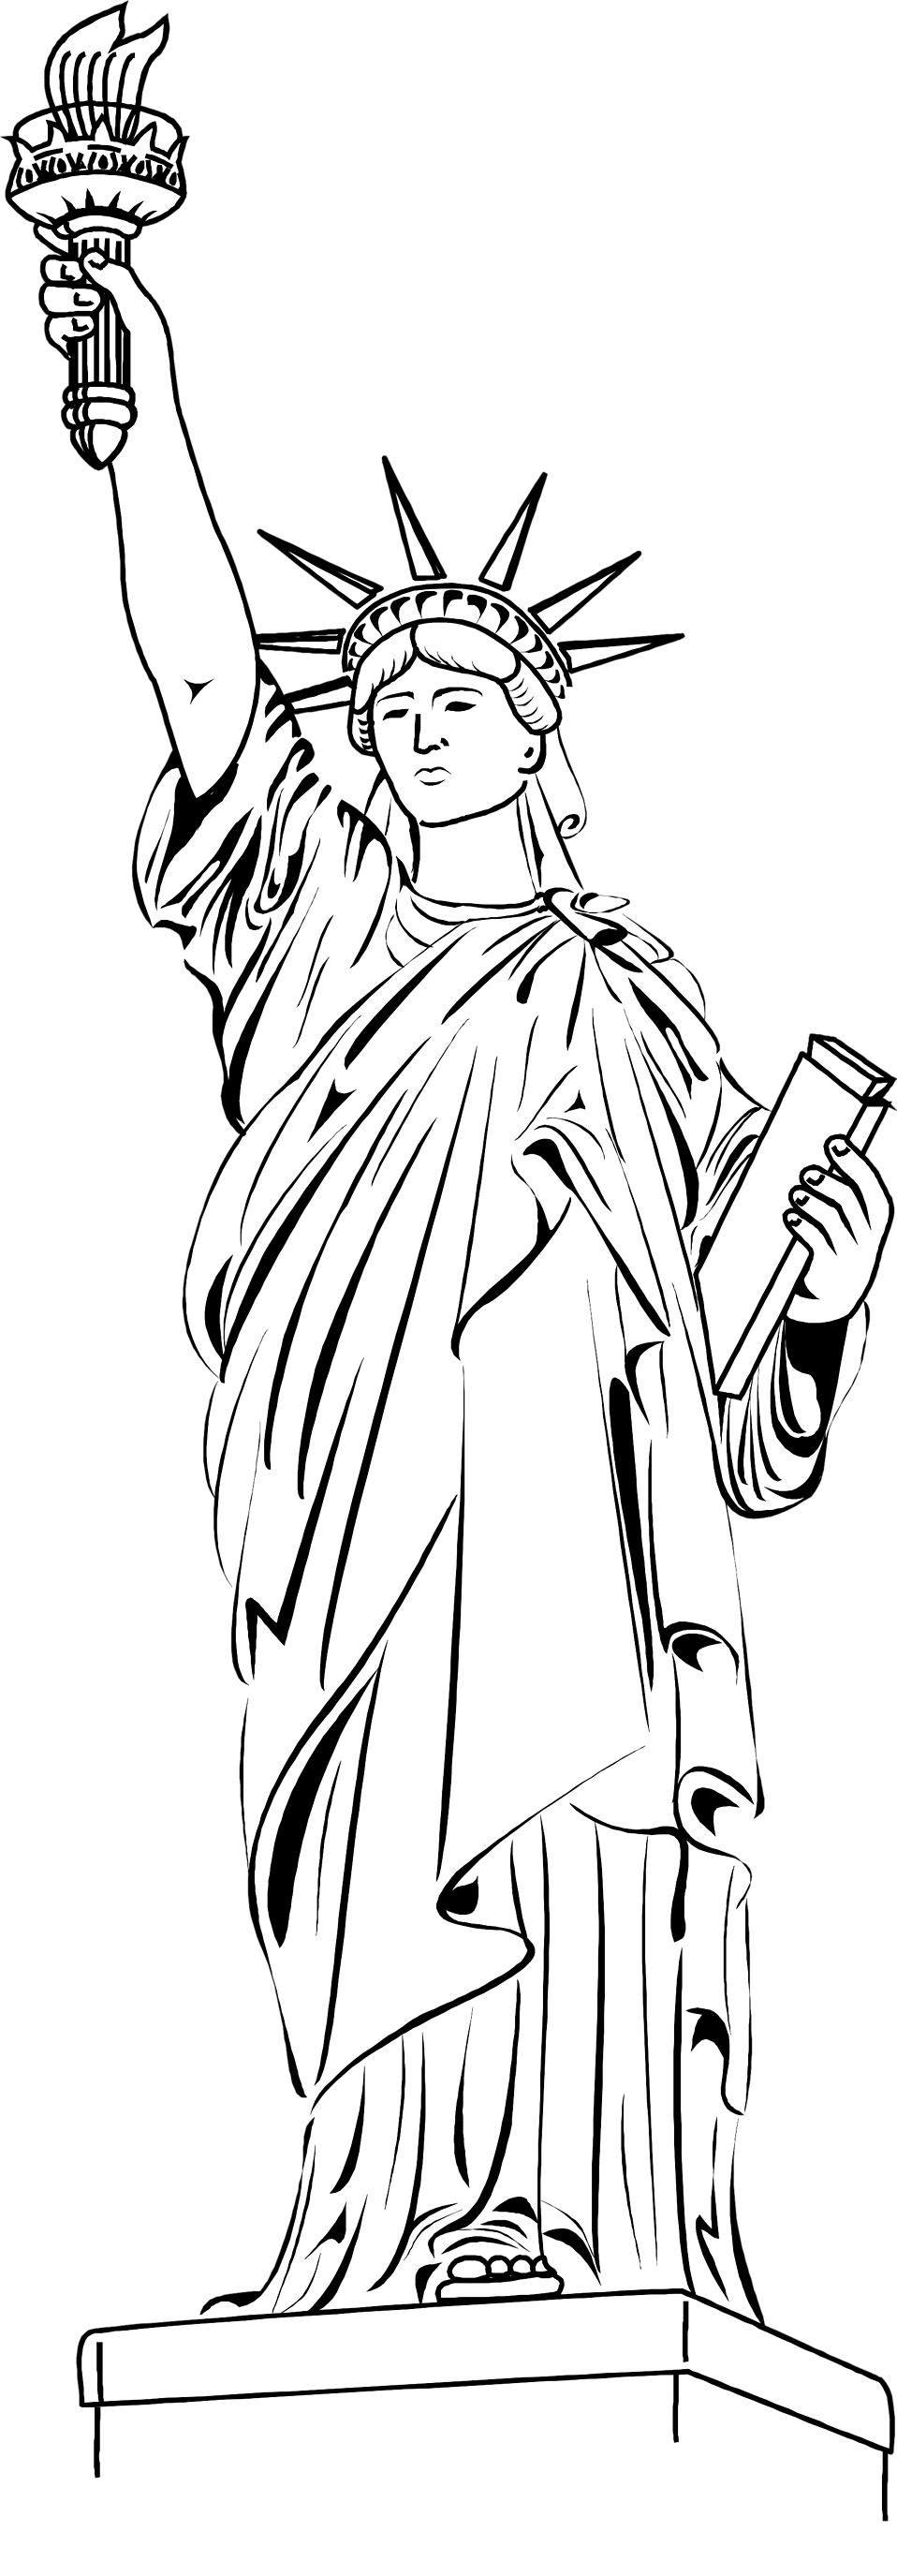 Statue Of Liberty Clipart Illustrations And Statue Of Liberty Cartoons